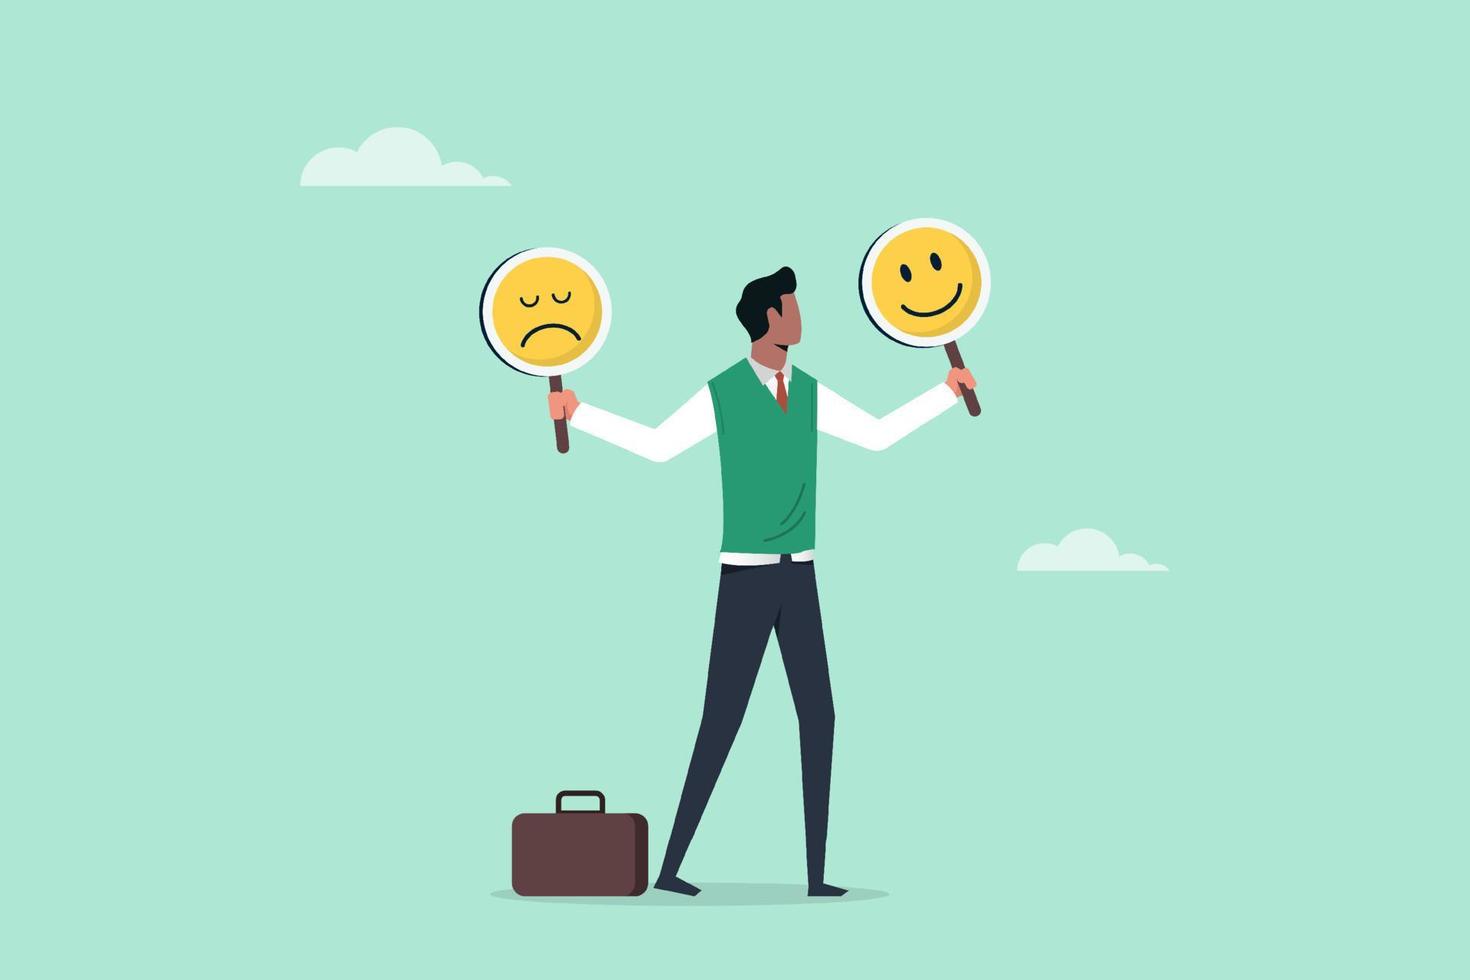 Mental health and emotional state. Smile face and sad face. Businessman holding smile and sad face sign vector